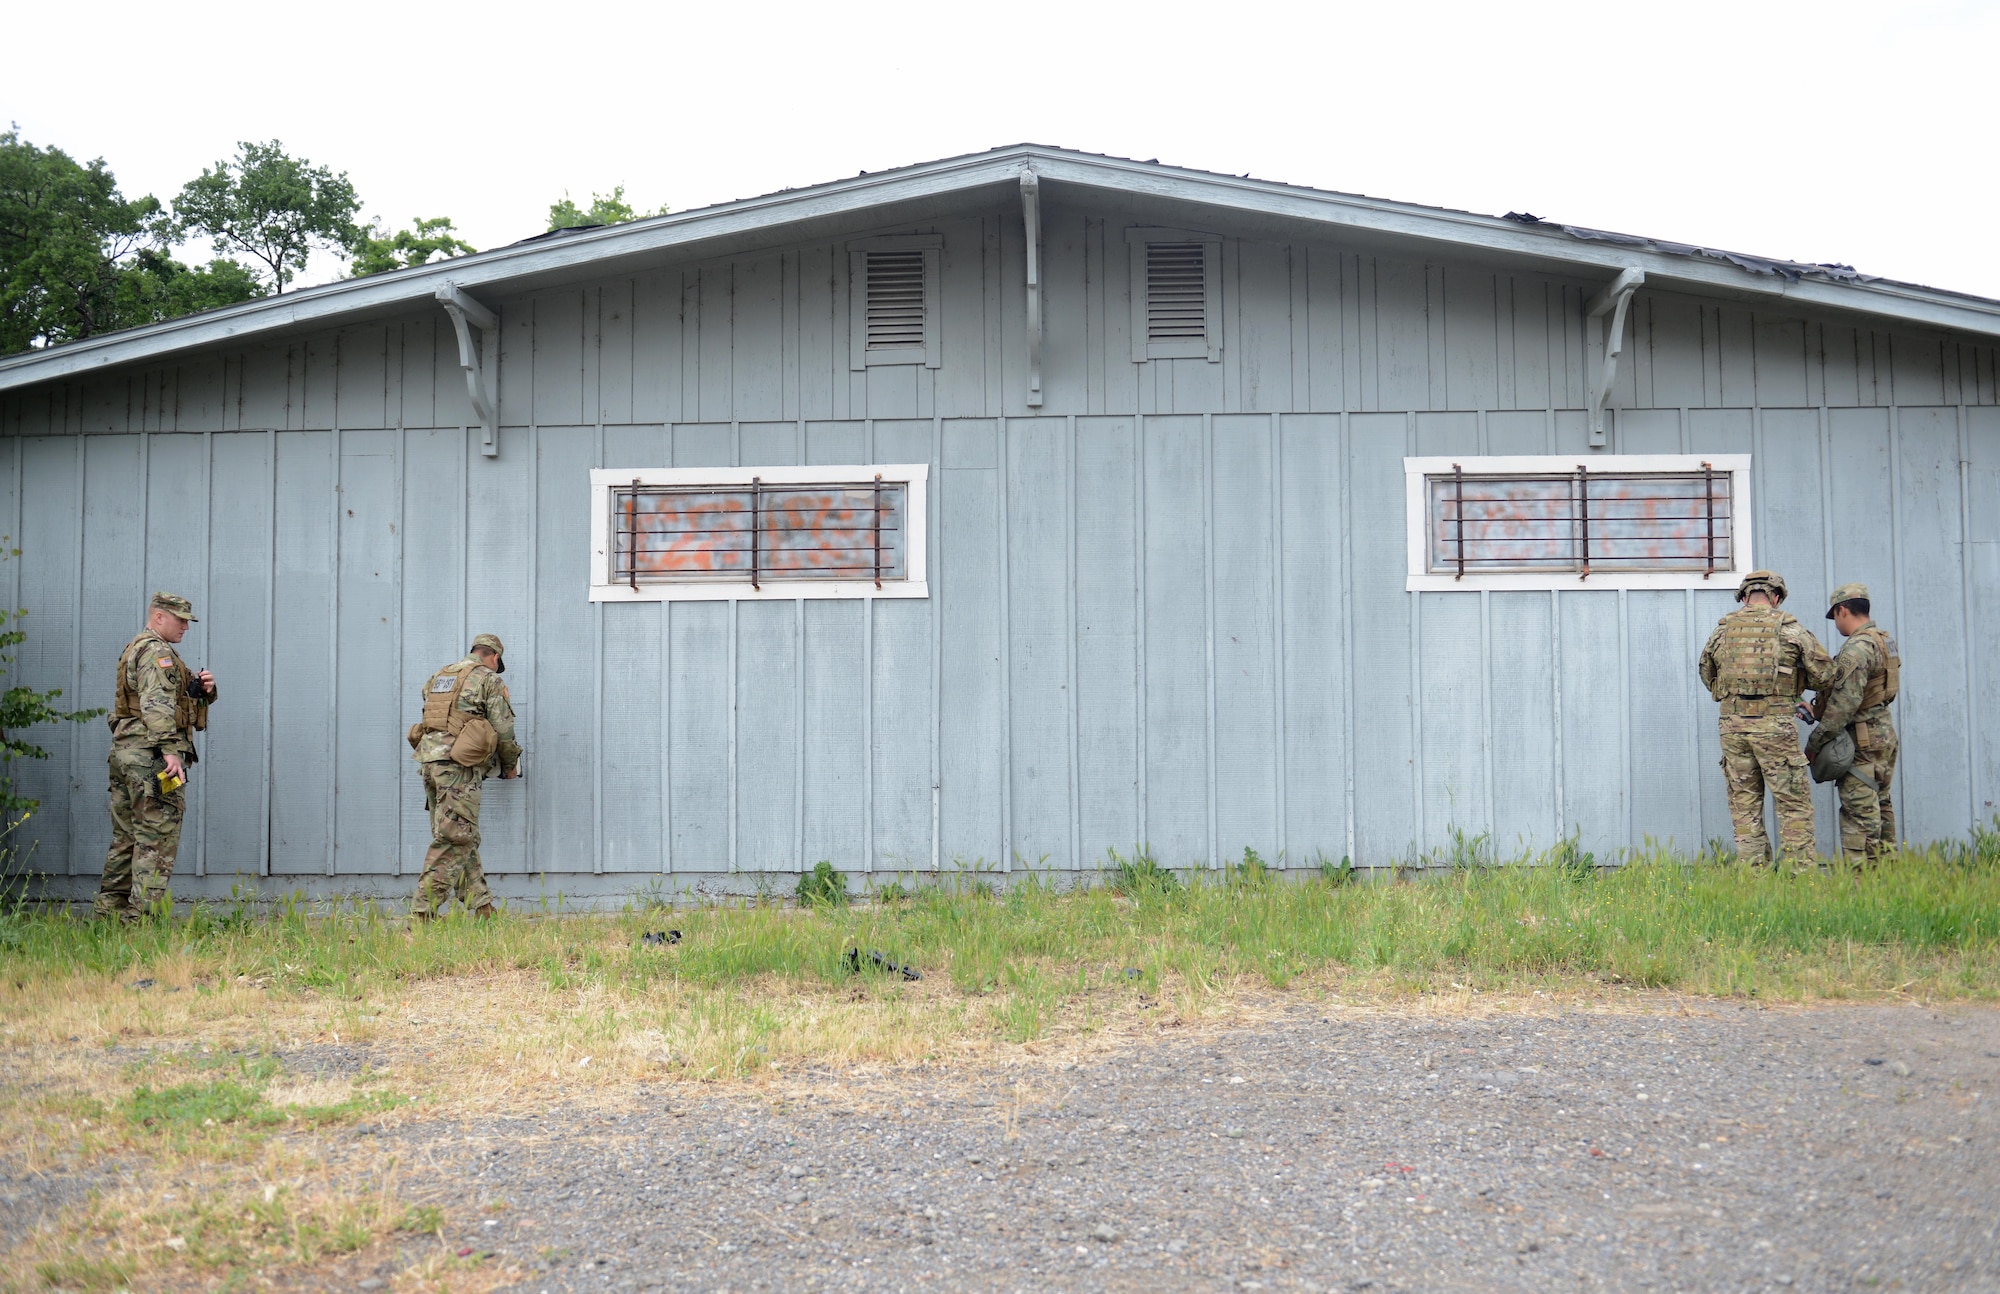 Soldiers with the 95th Civil Support Team inspect an abandoned building for radiological material May 5th, 2016, at Clear Lake, California. The building was a simulated “bomb factory” during an exercise designed to evaluate a synchronized, multi-agency response to a crisis situation. (U.S. Air Force photo by Senior Airman Bobby Cummings)